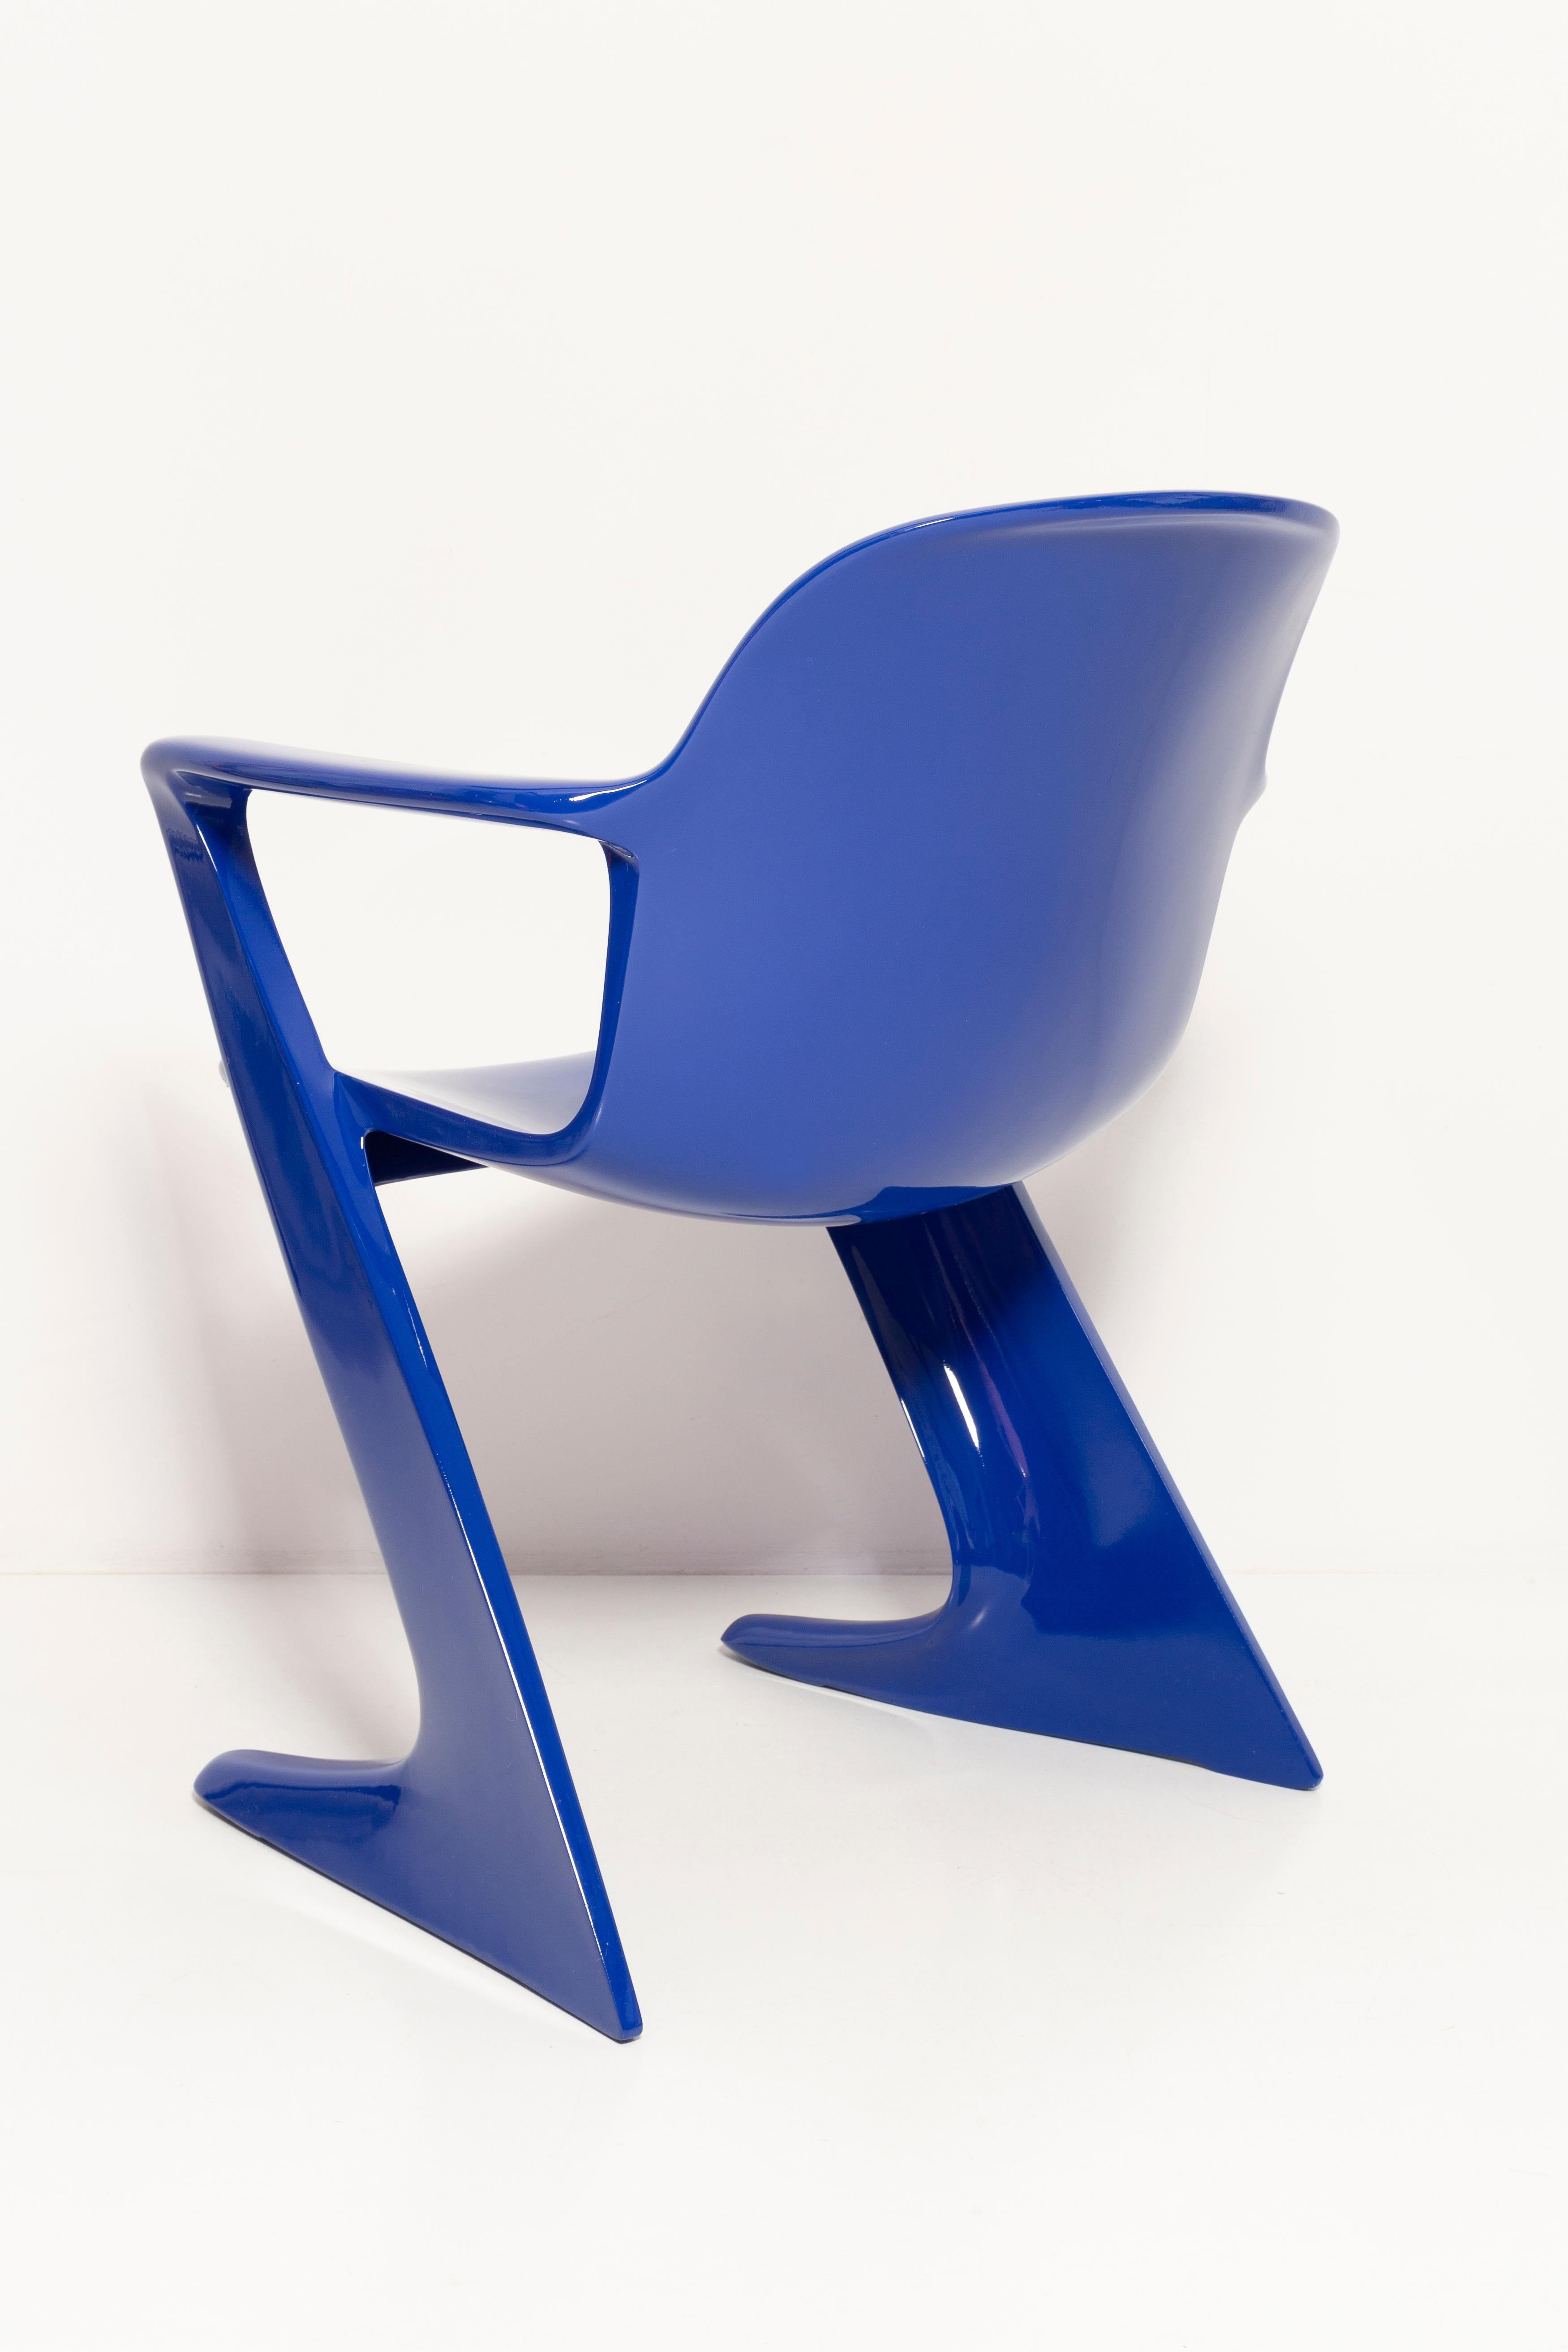 Set of Eight Ultramarine Blue Kangaroo Chairs, by Ernst Moeckl, Germany, 1968 For Sale 3